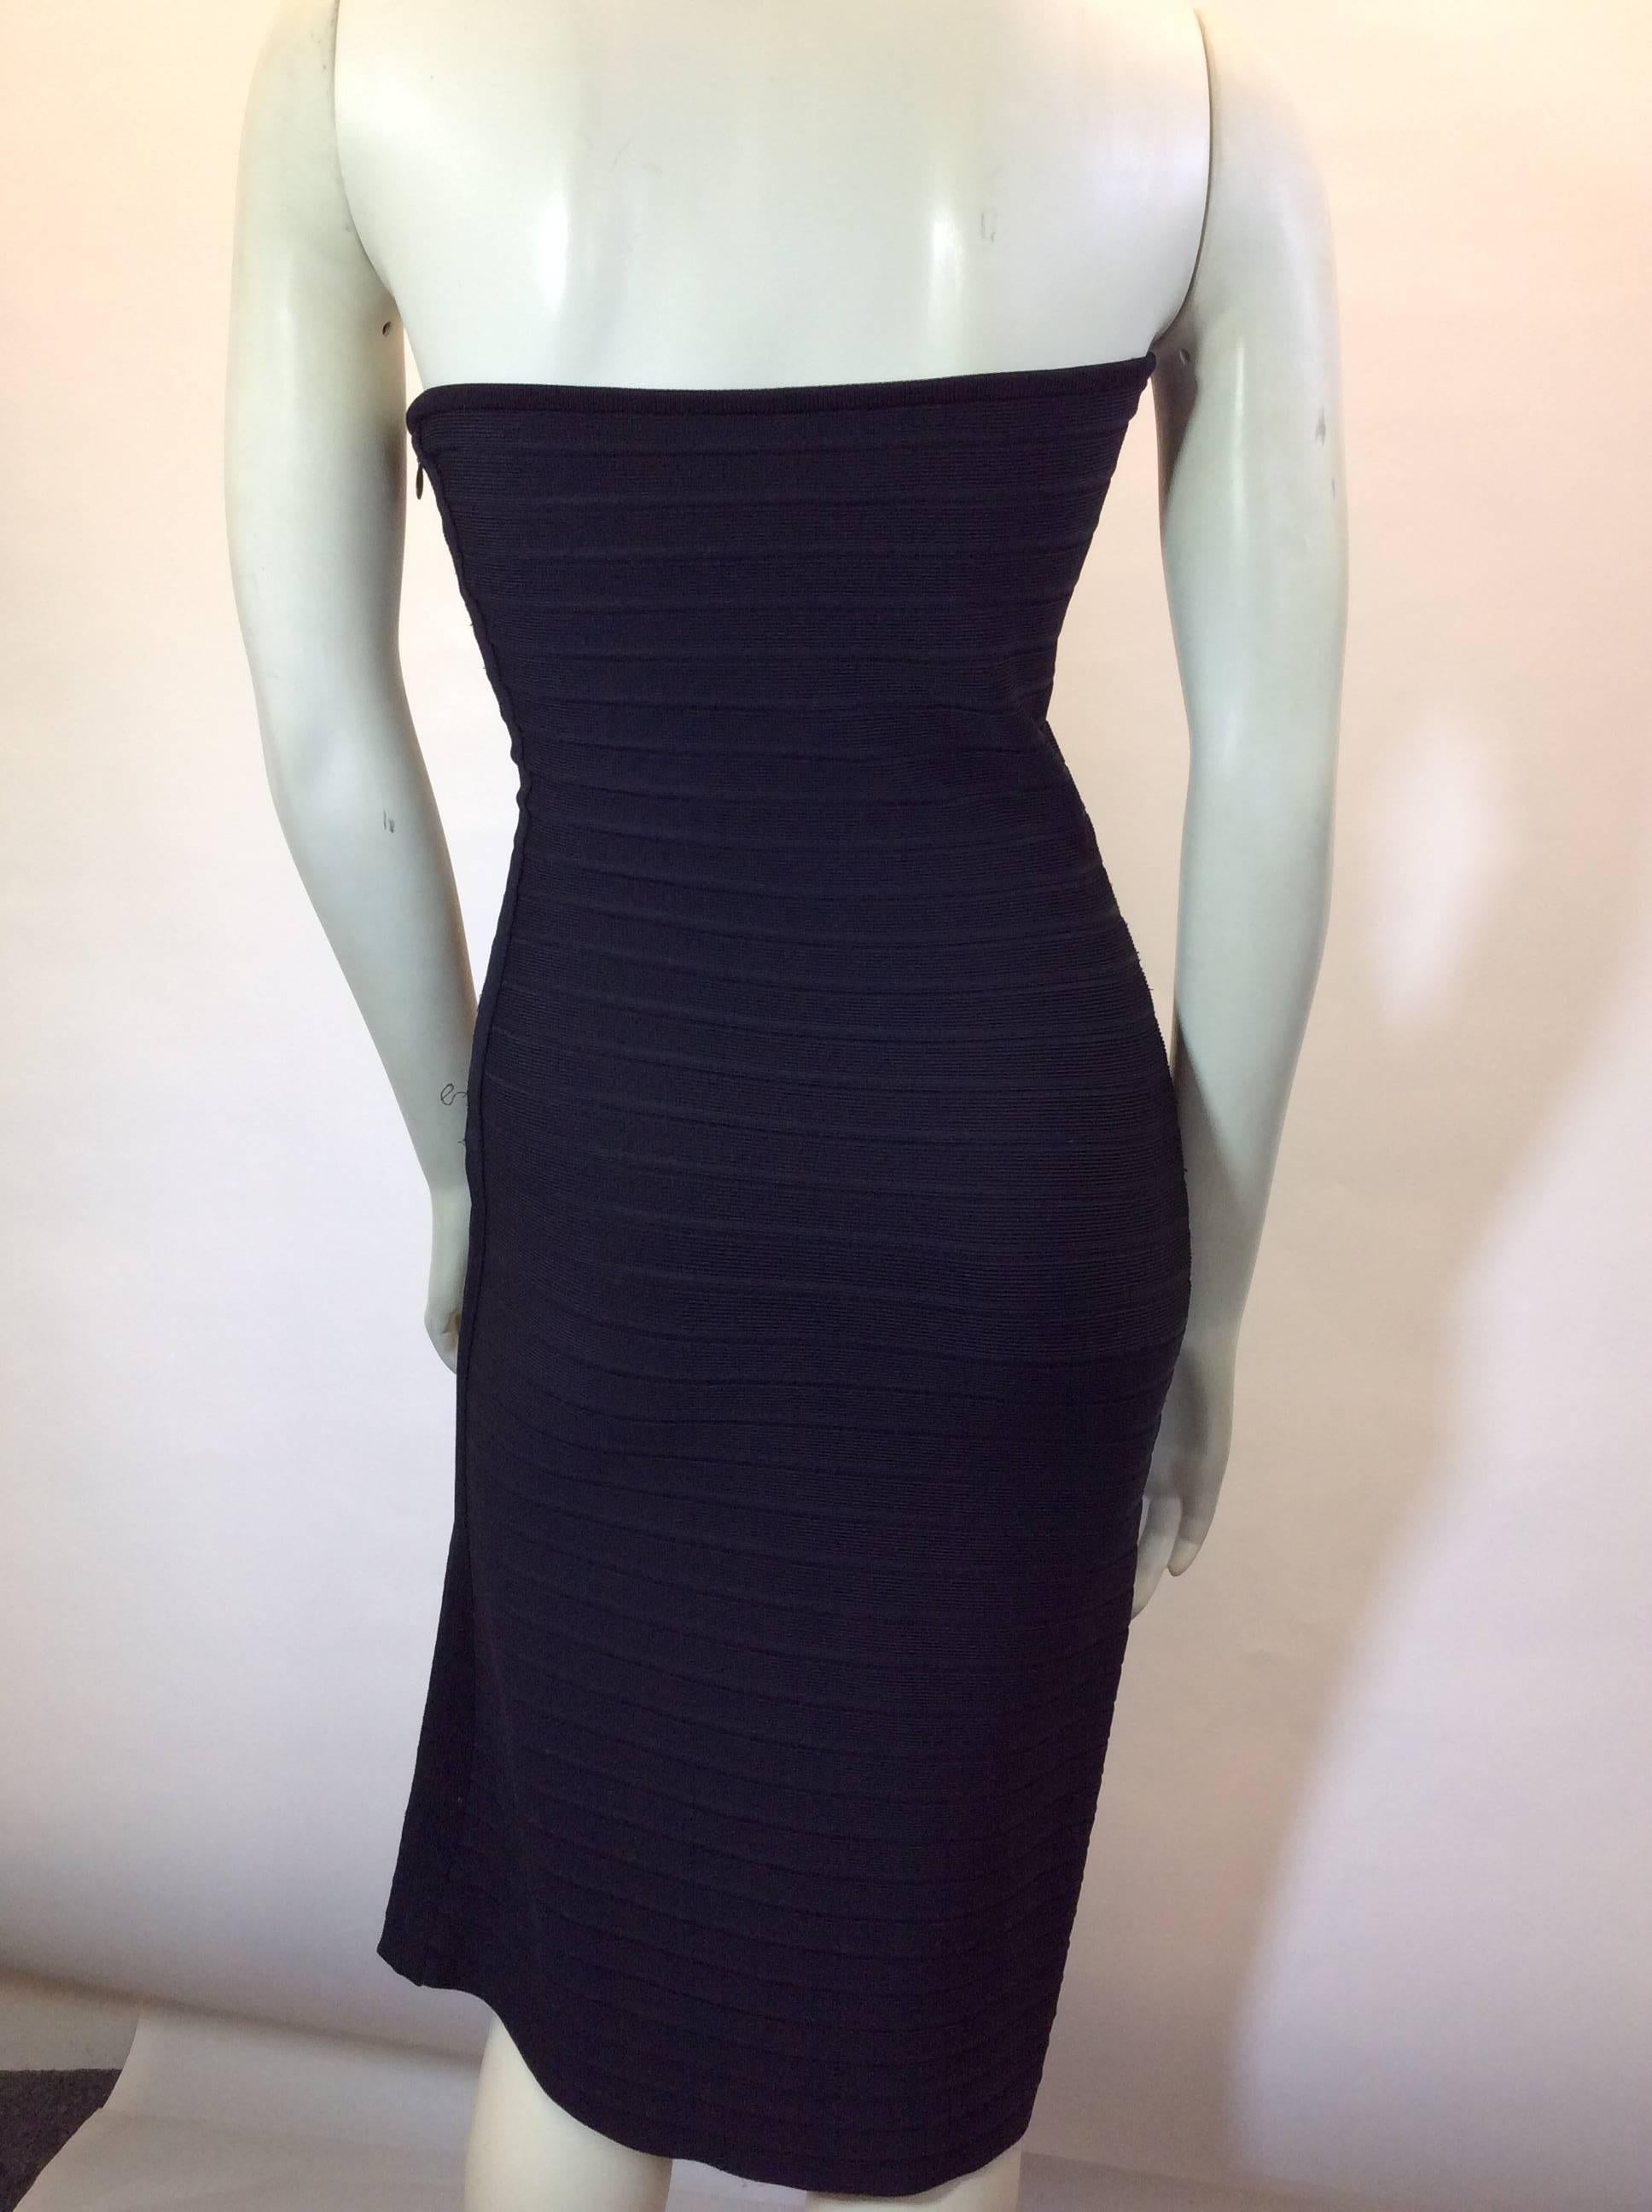 Herve Leger Strapless Black Bandage Dress In Excellent Condition For Sale In Narberth, PA